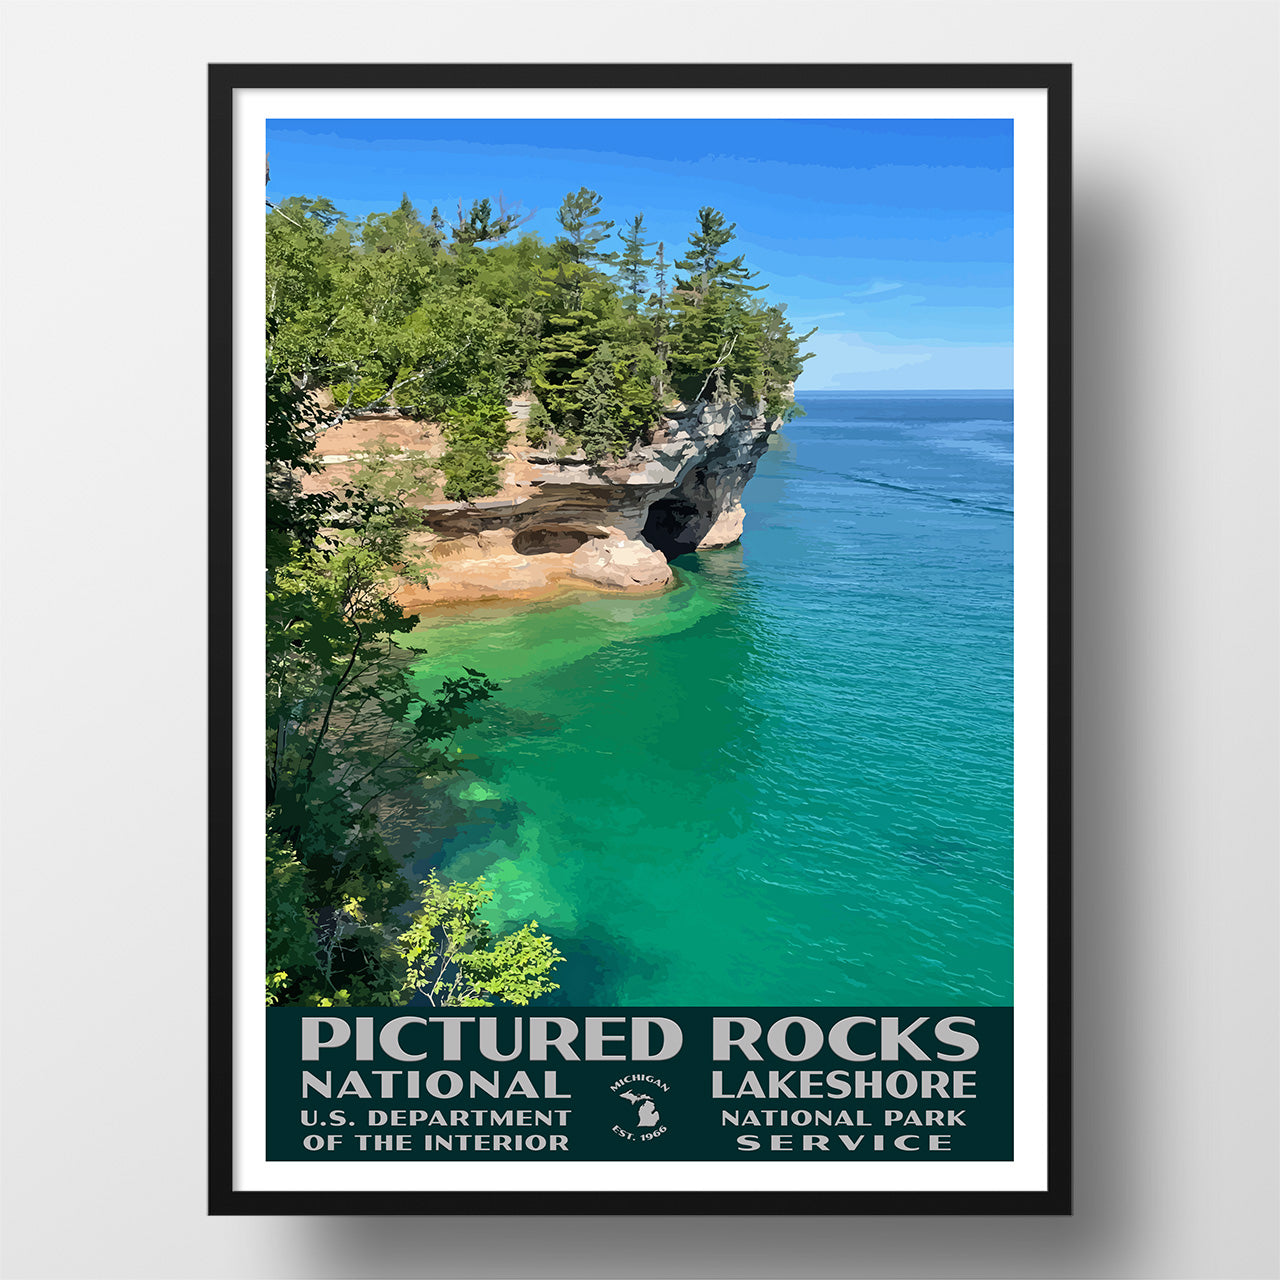 Pictured Rocks National Lakeshore Poster-WPA (Mosquito Trail)